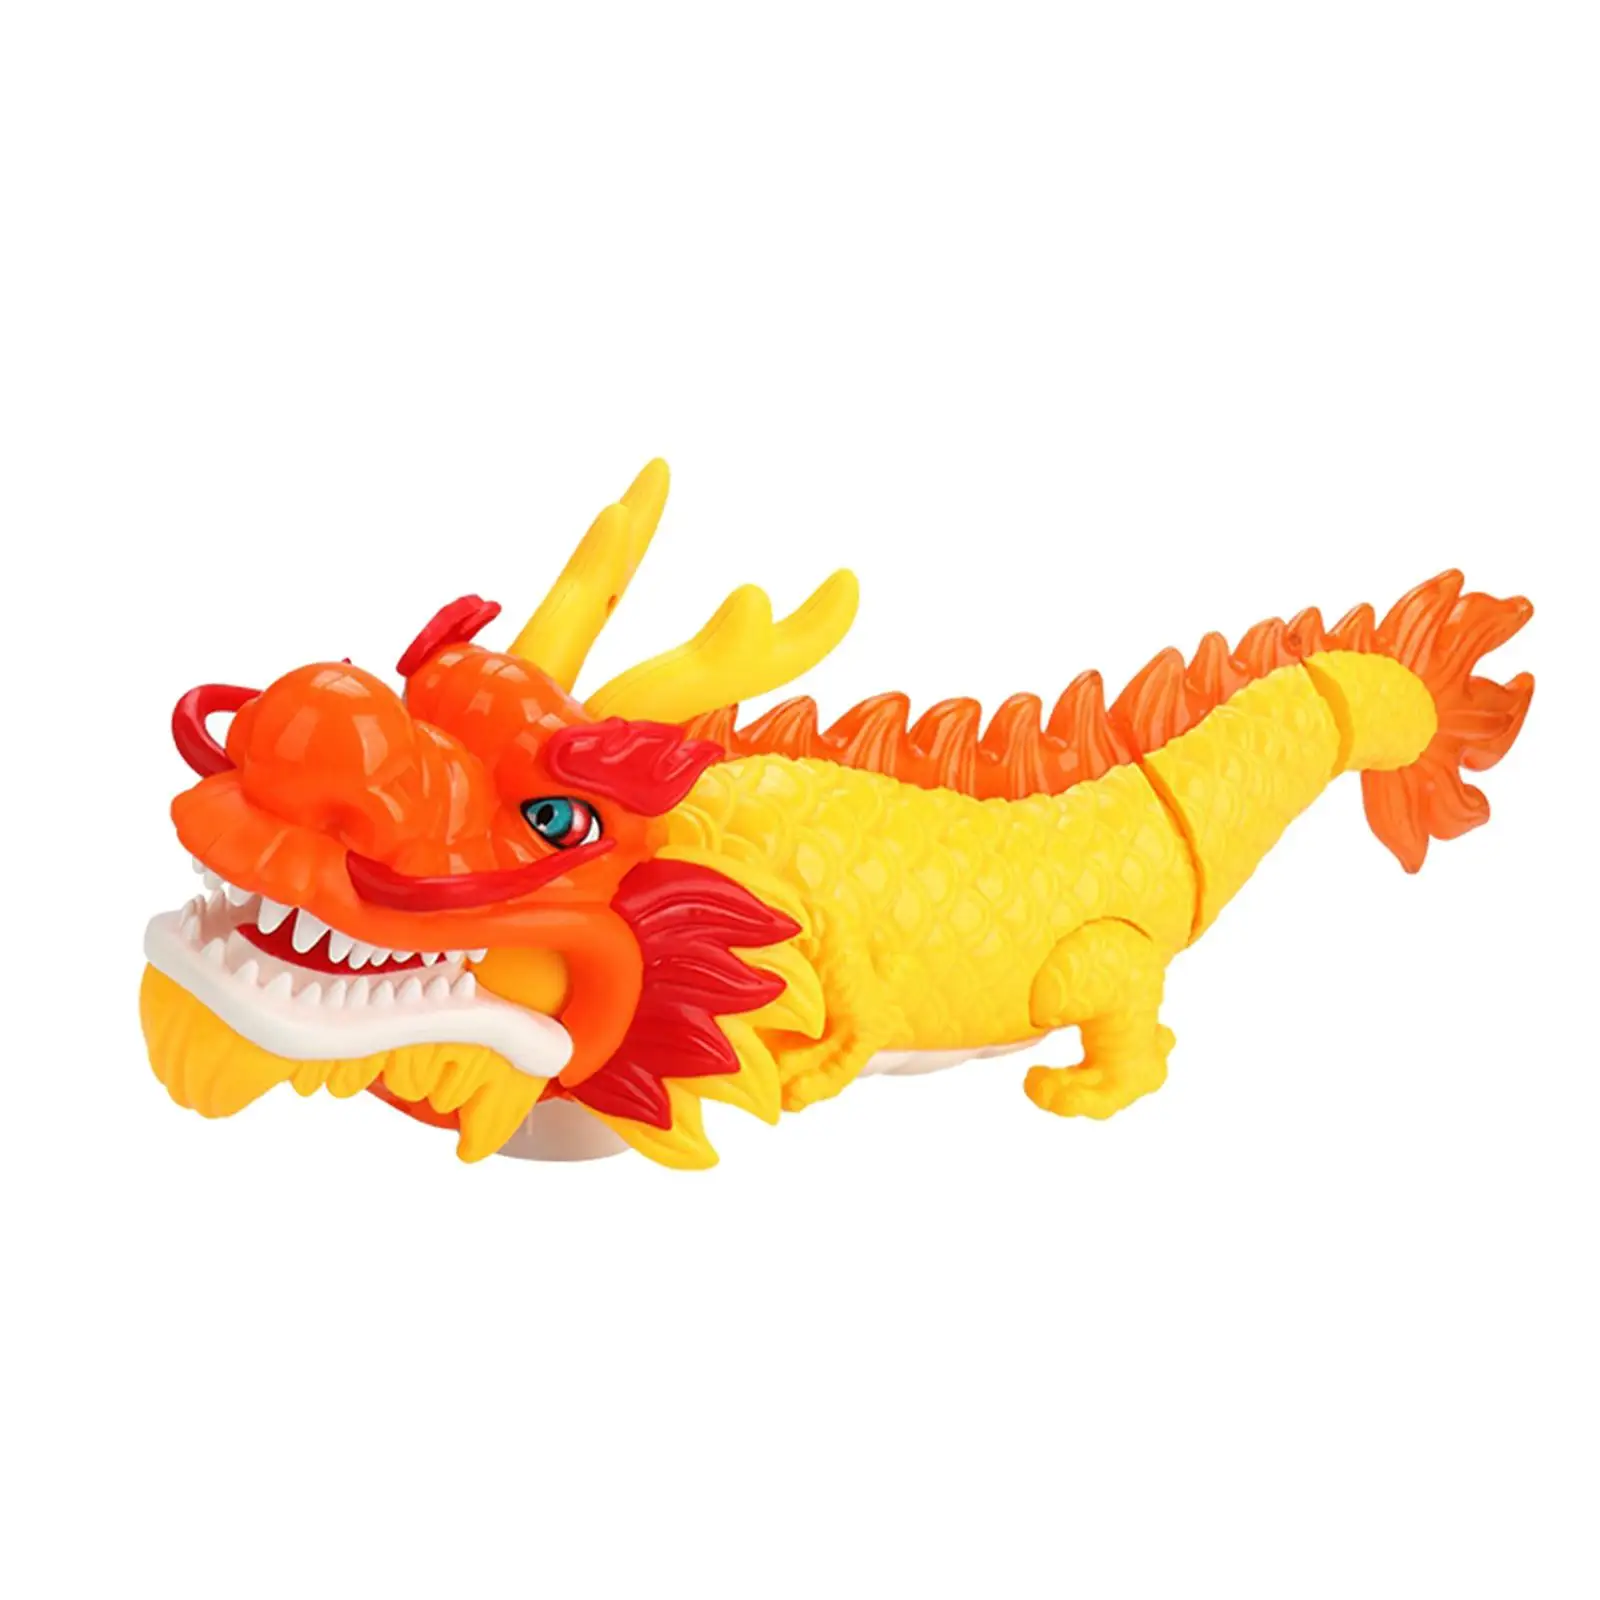 Eletric Dragon Toy Creative Walking Dragon Toy Gifts Animal Birthday Gifts Crawling Toy for Kid Girls Adults Children Age 8-12